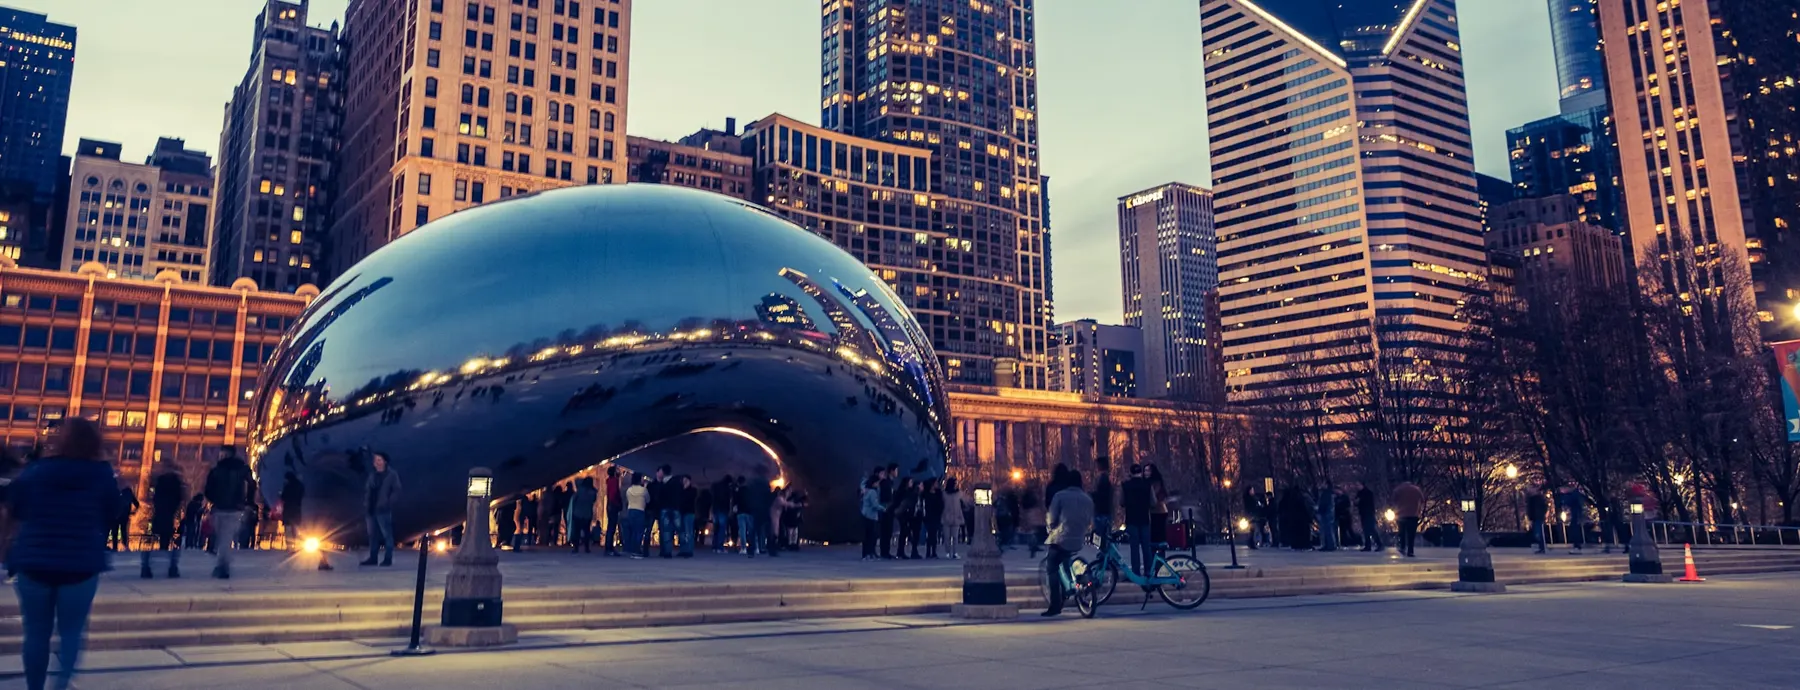 Exciting and adventurous activities in Chicago